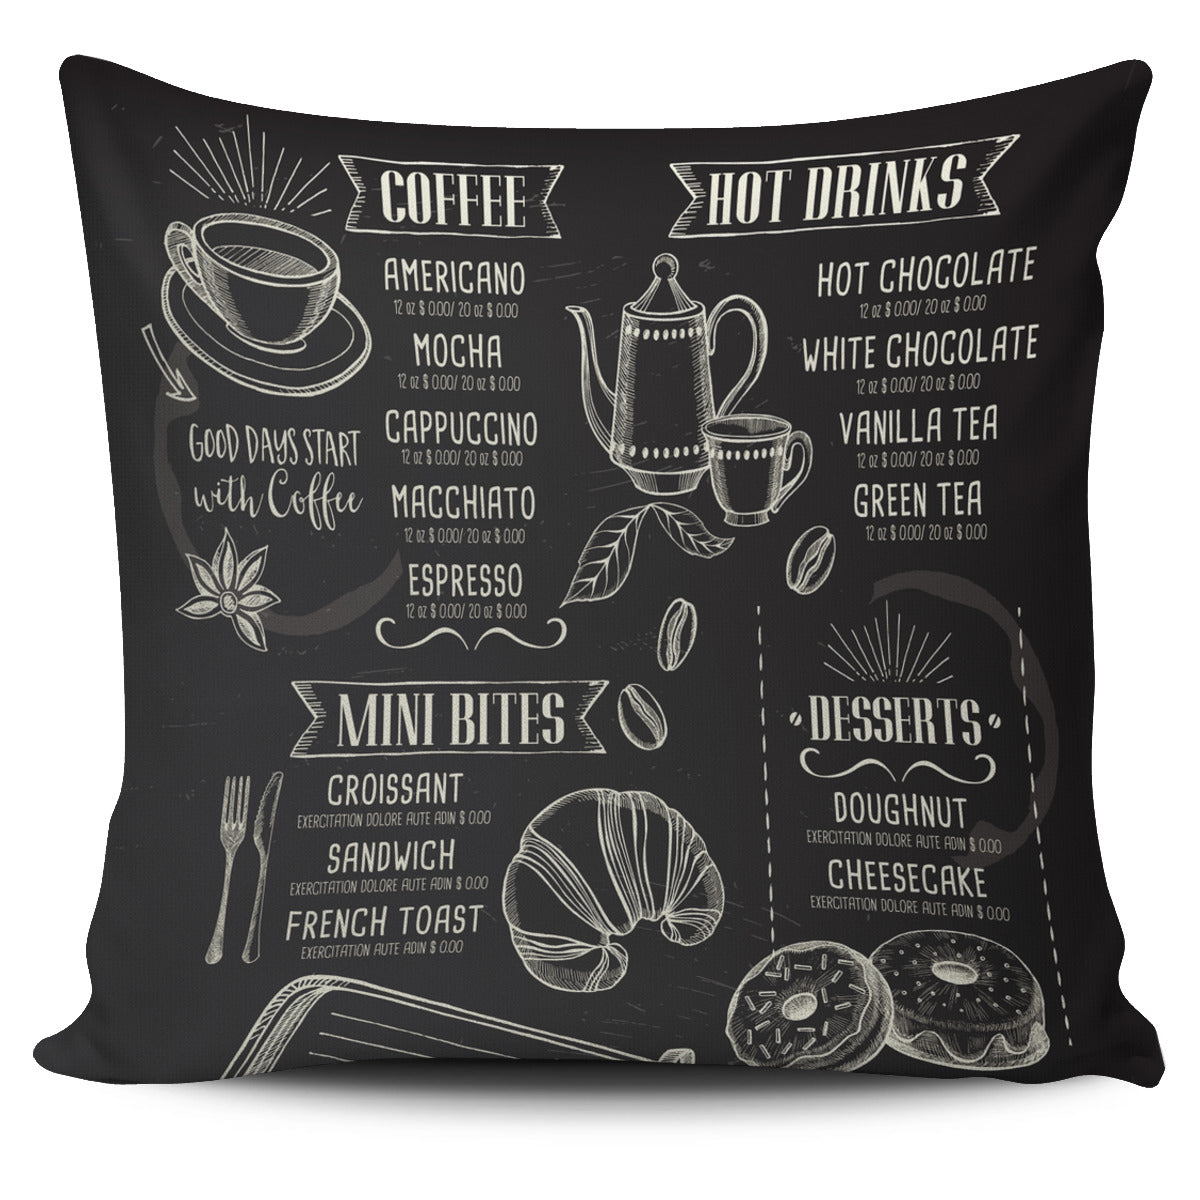 Coffee House Pillow Case